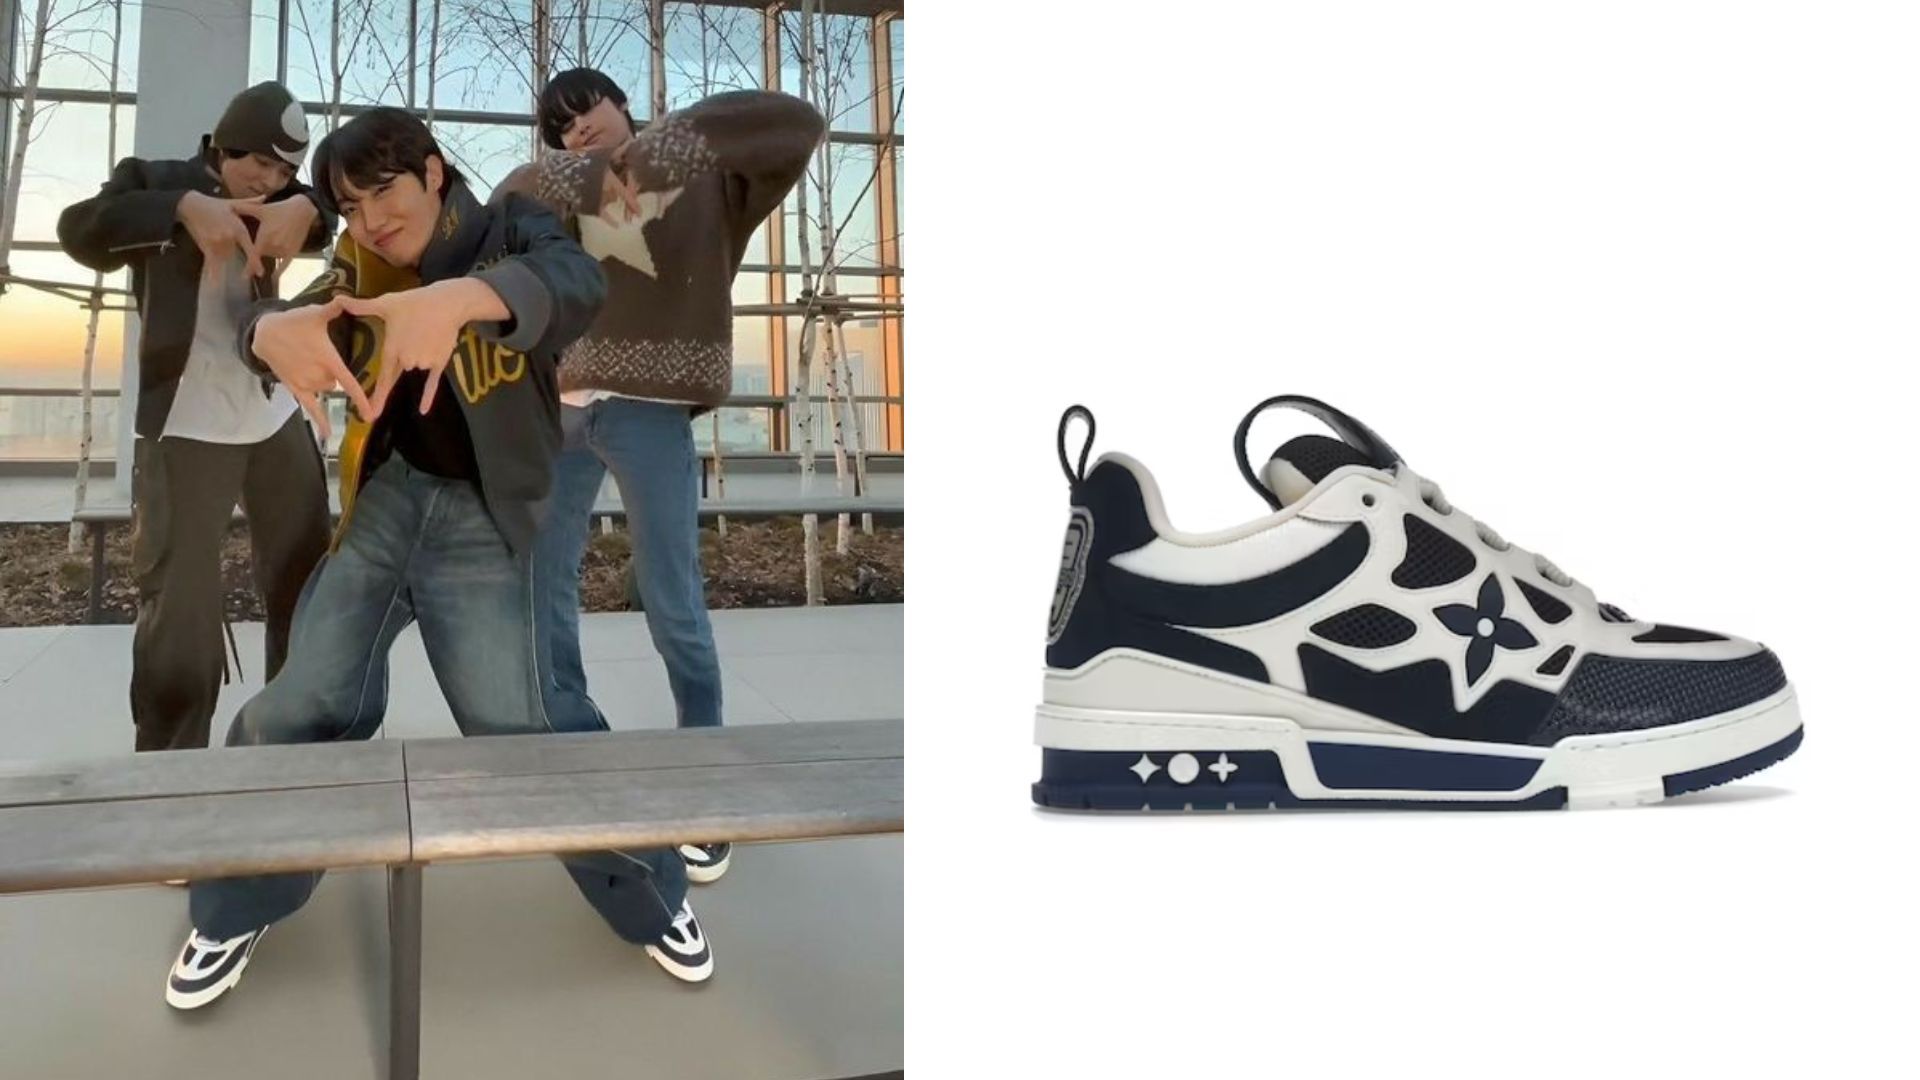 The Most Expensive Luxury Shoes Owned by Fashionista BTS J-Hope